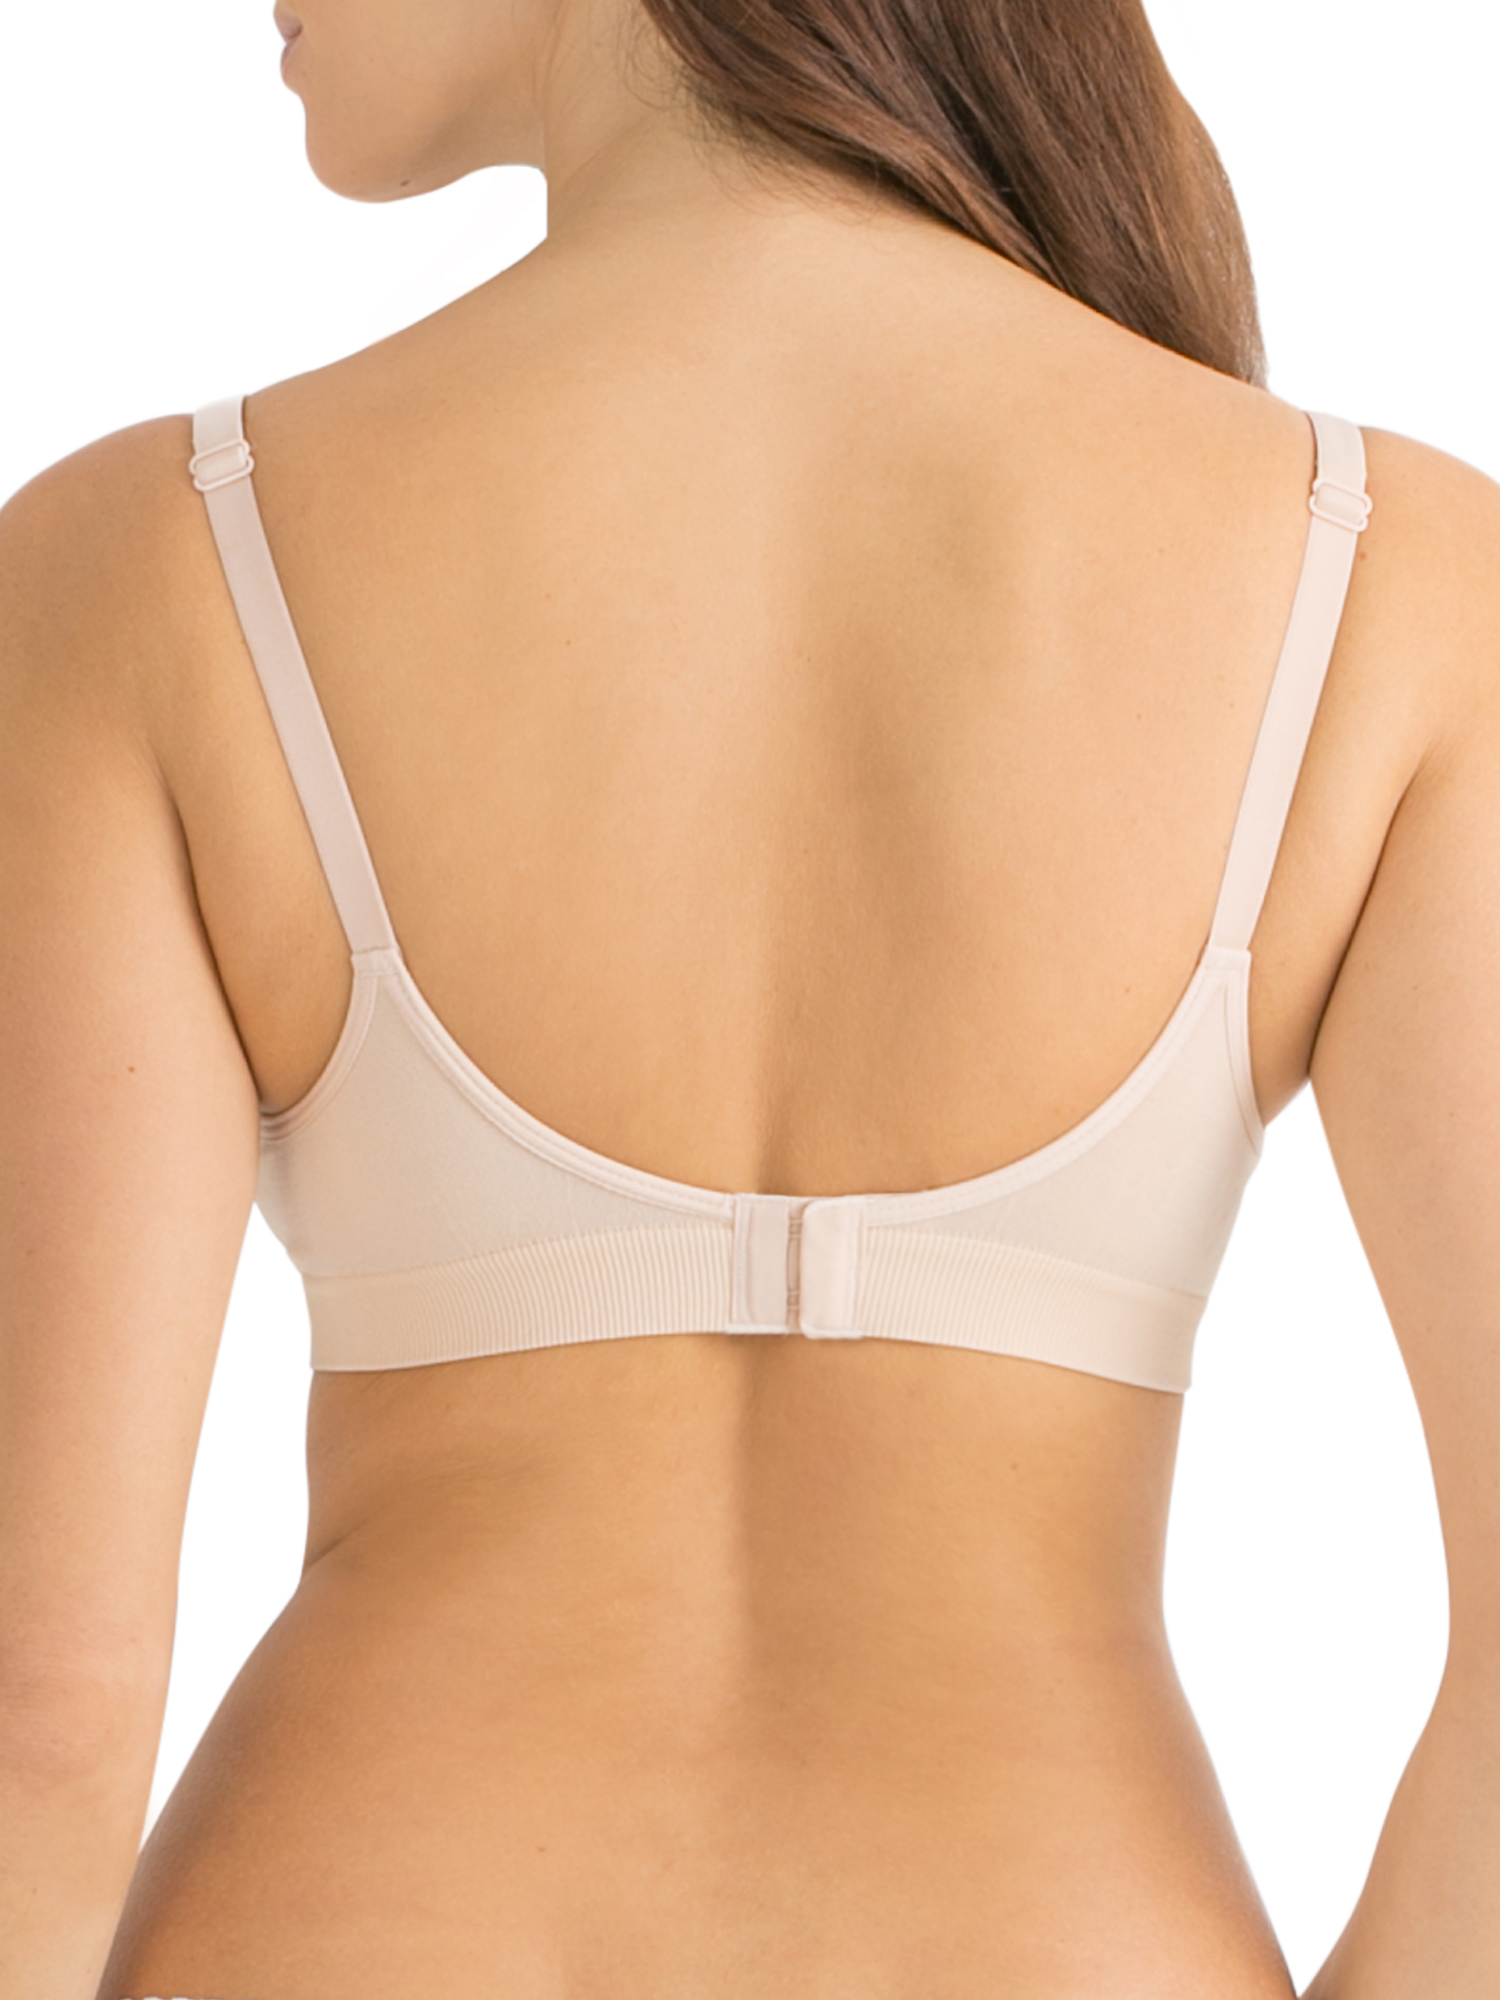 Fruit of the Loom Women's Seamless Wire Free Lift Bra, Style FT640 - image 2 of 2